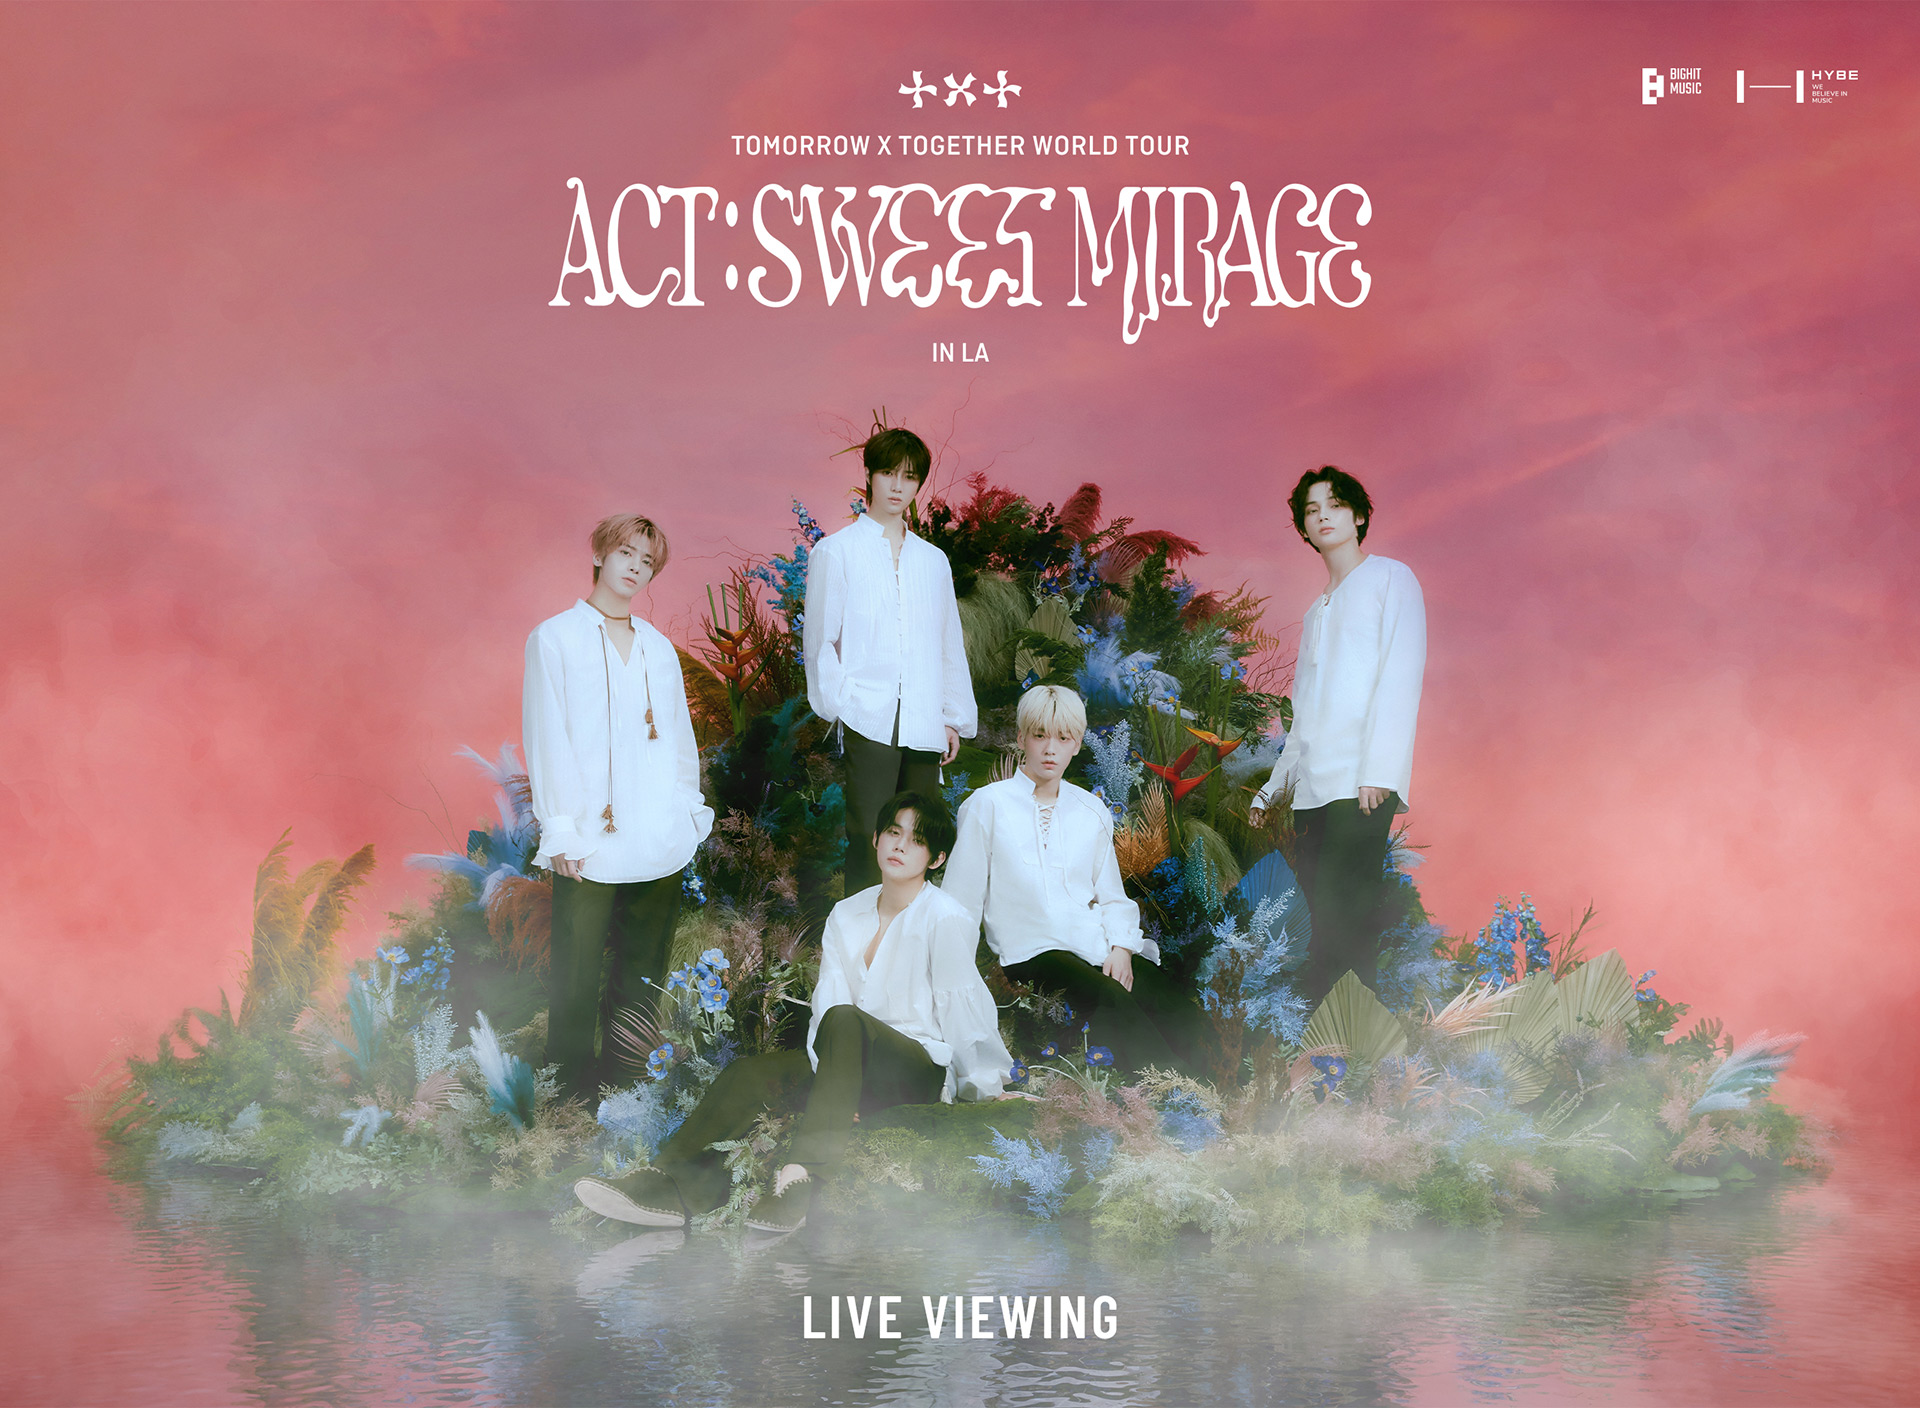 TOMORROW X TOGETHER WORLD TOUR <ACT : SWEET MIRAGE> IN LA LIVE VIEWING